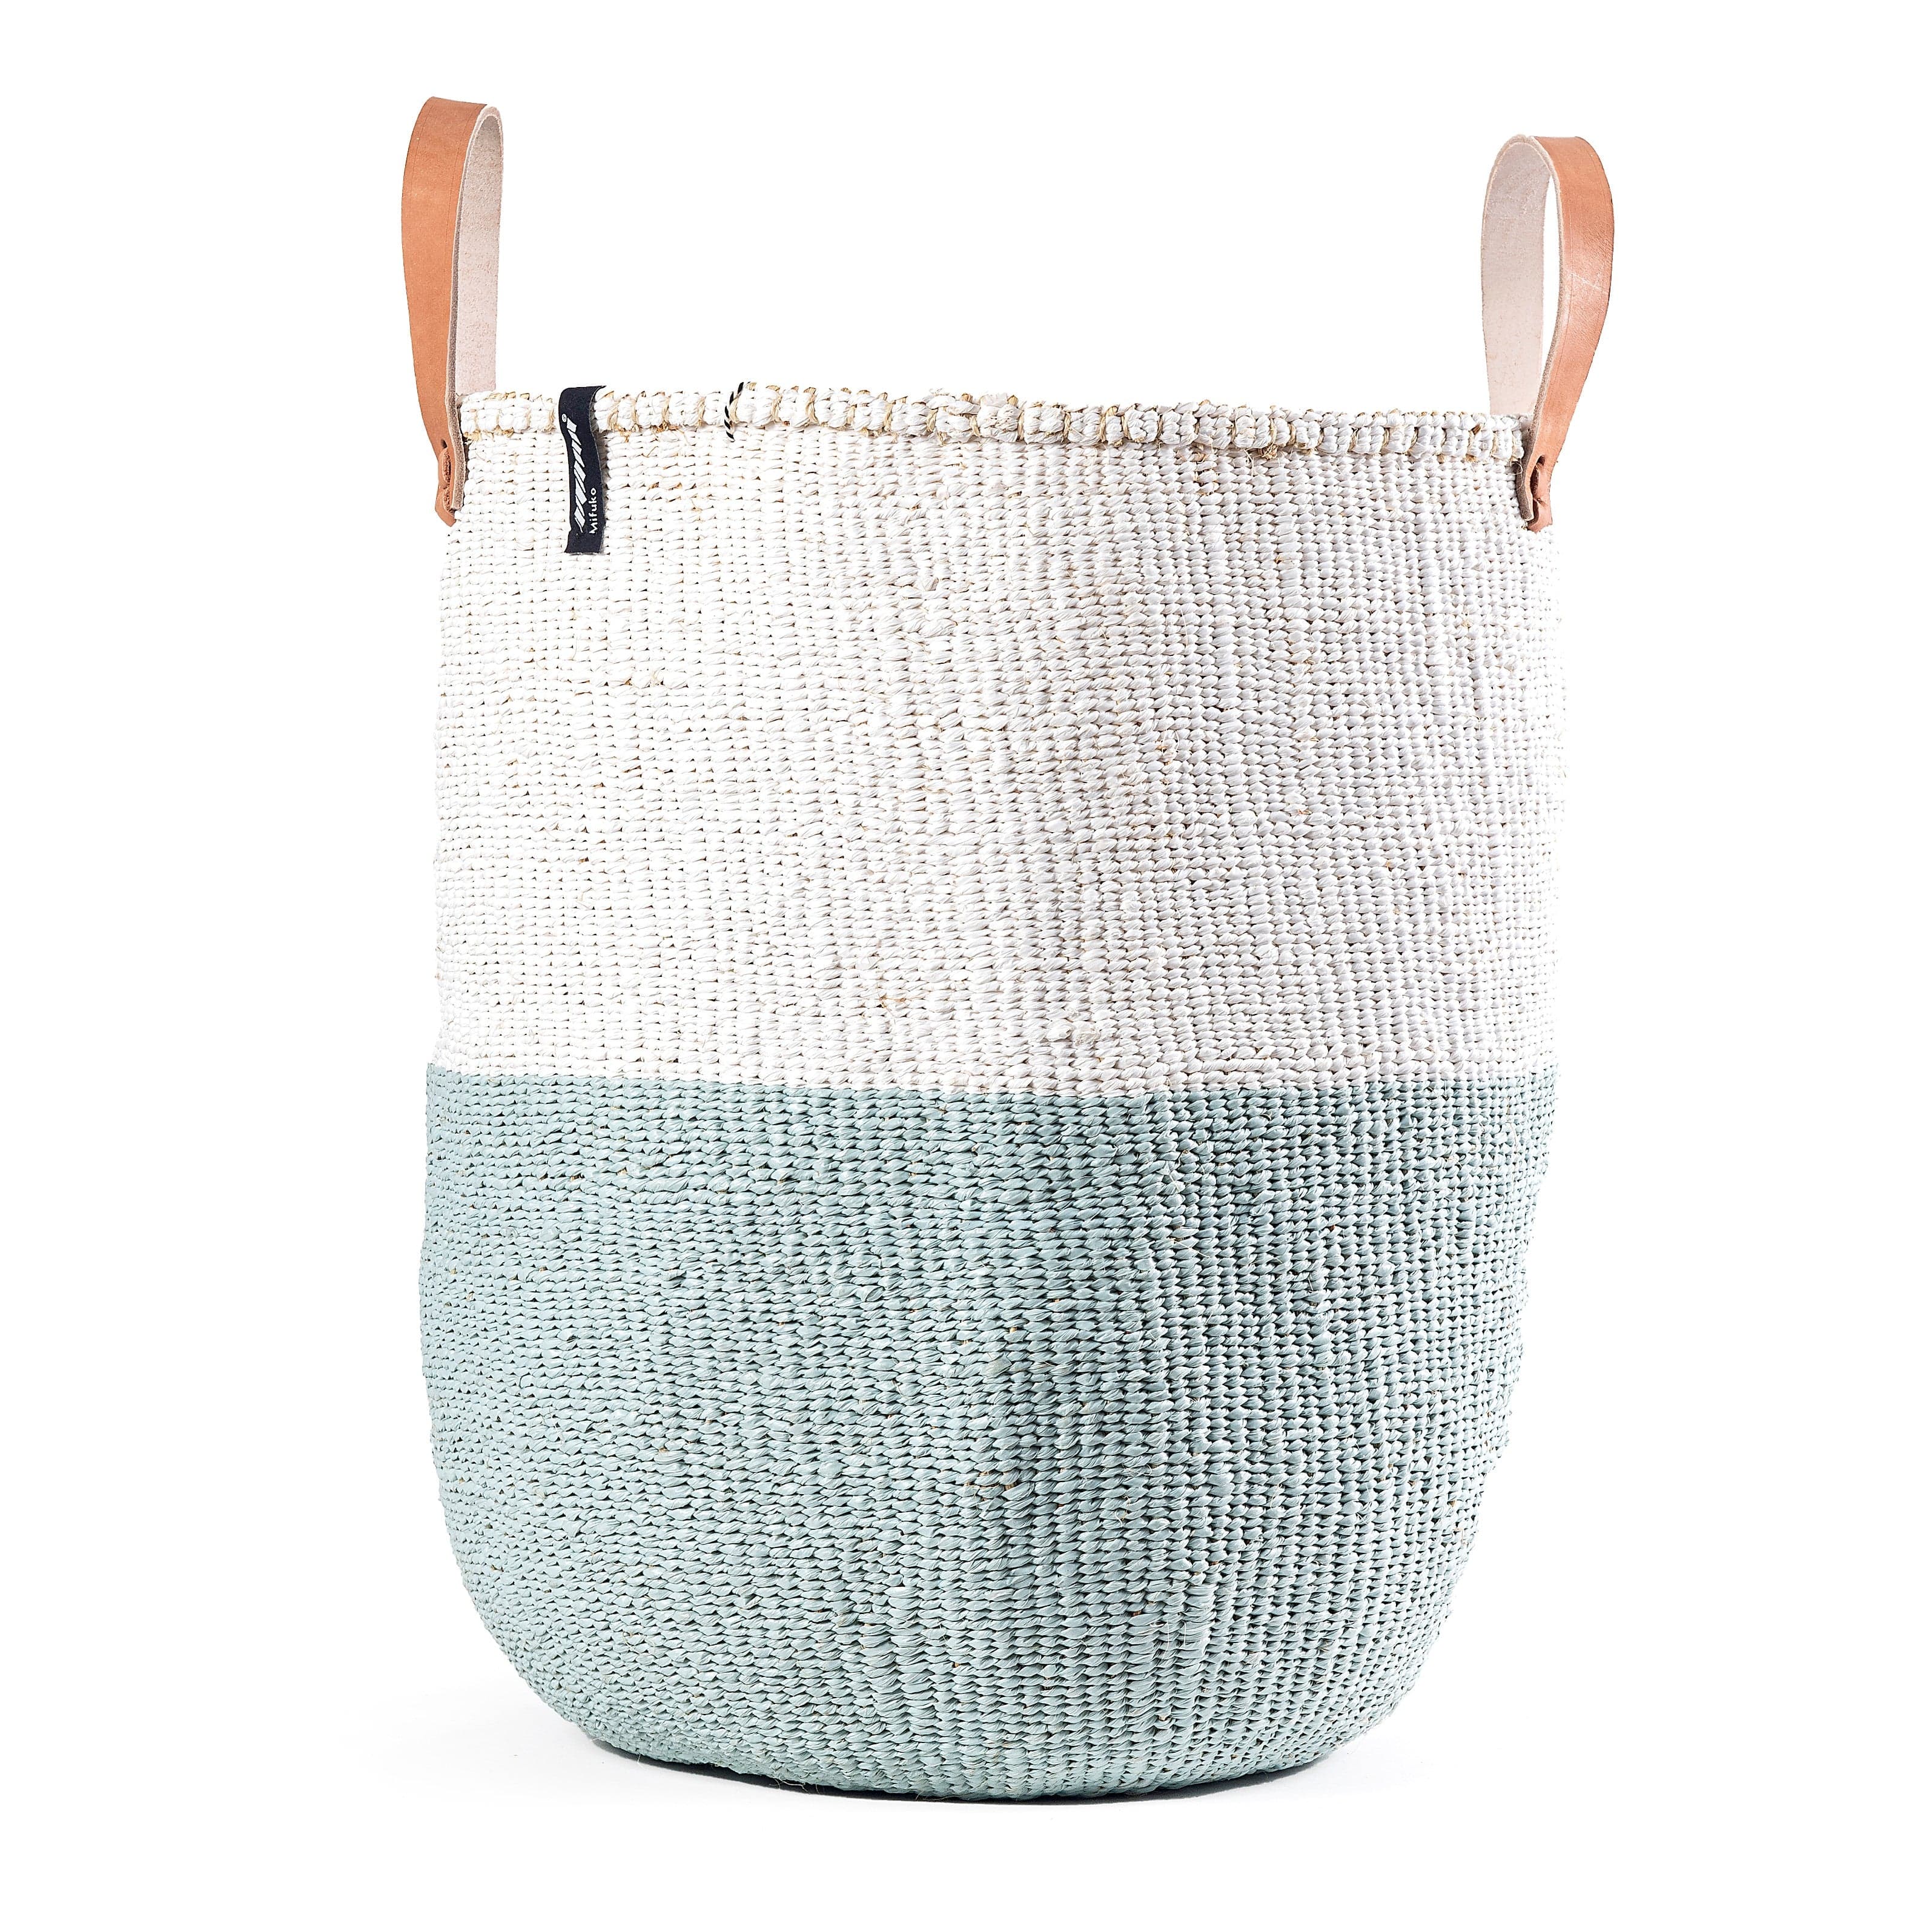 Mifuko Partly recycled plastic and sisal Market basket L Kiondo market basket | White and light blue duo L